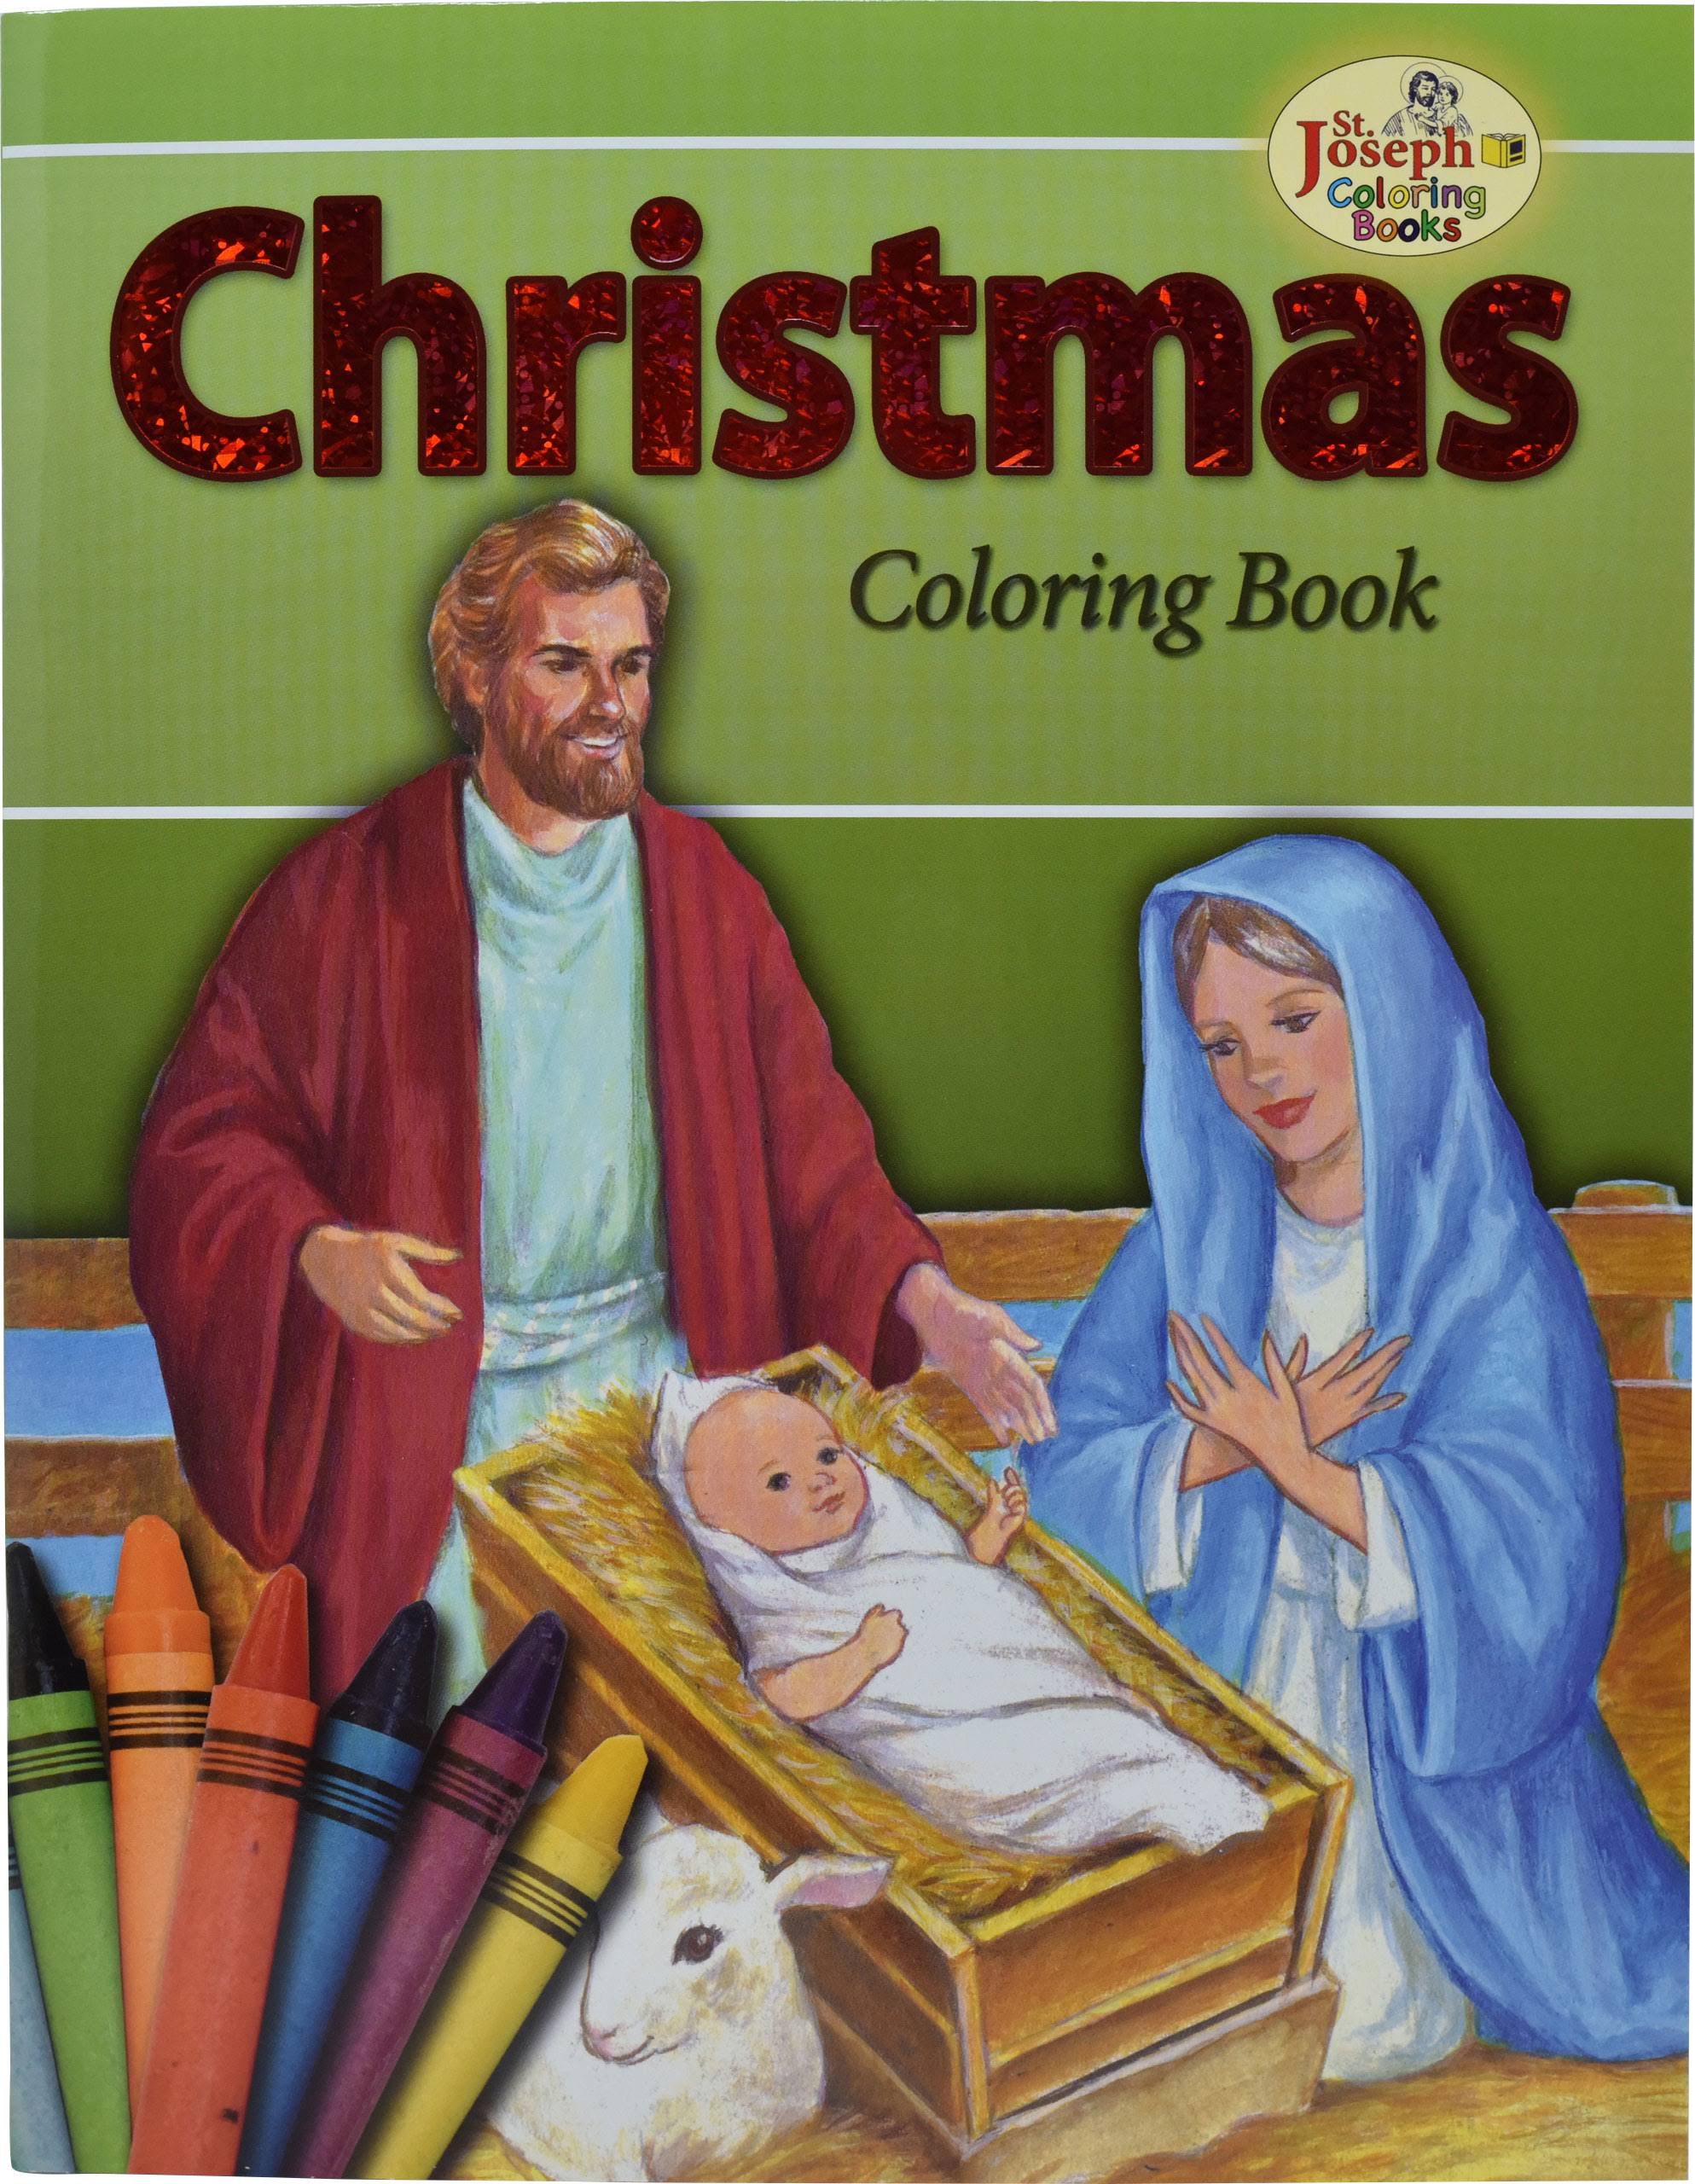 Coloring Book About Christmas - Catholic Book Publishing Corp